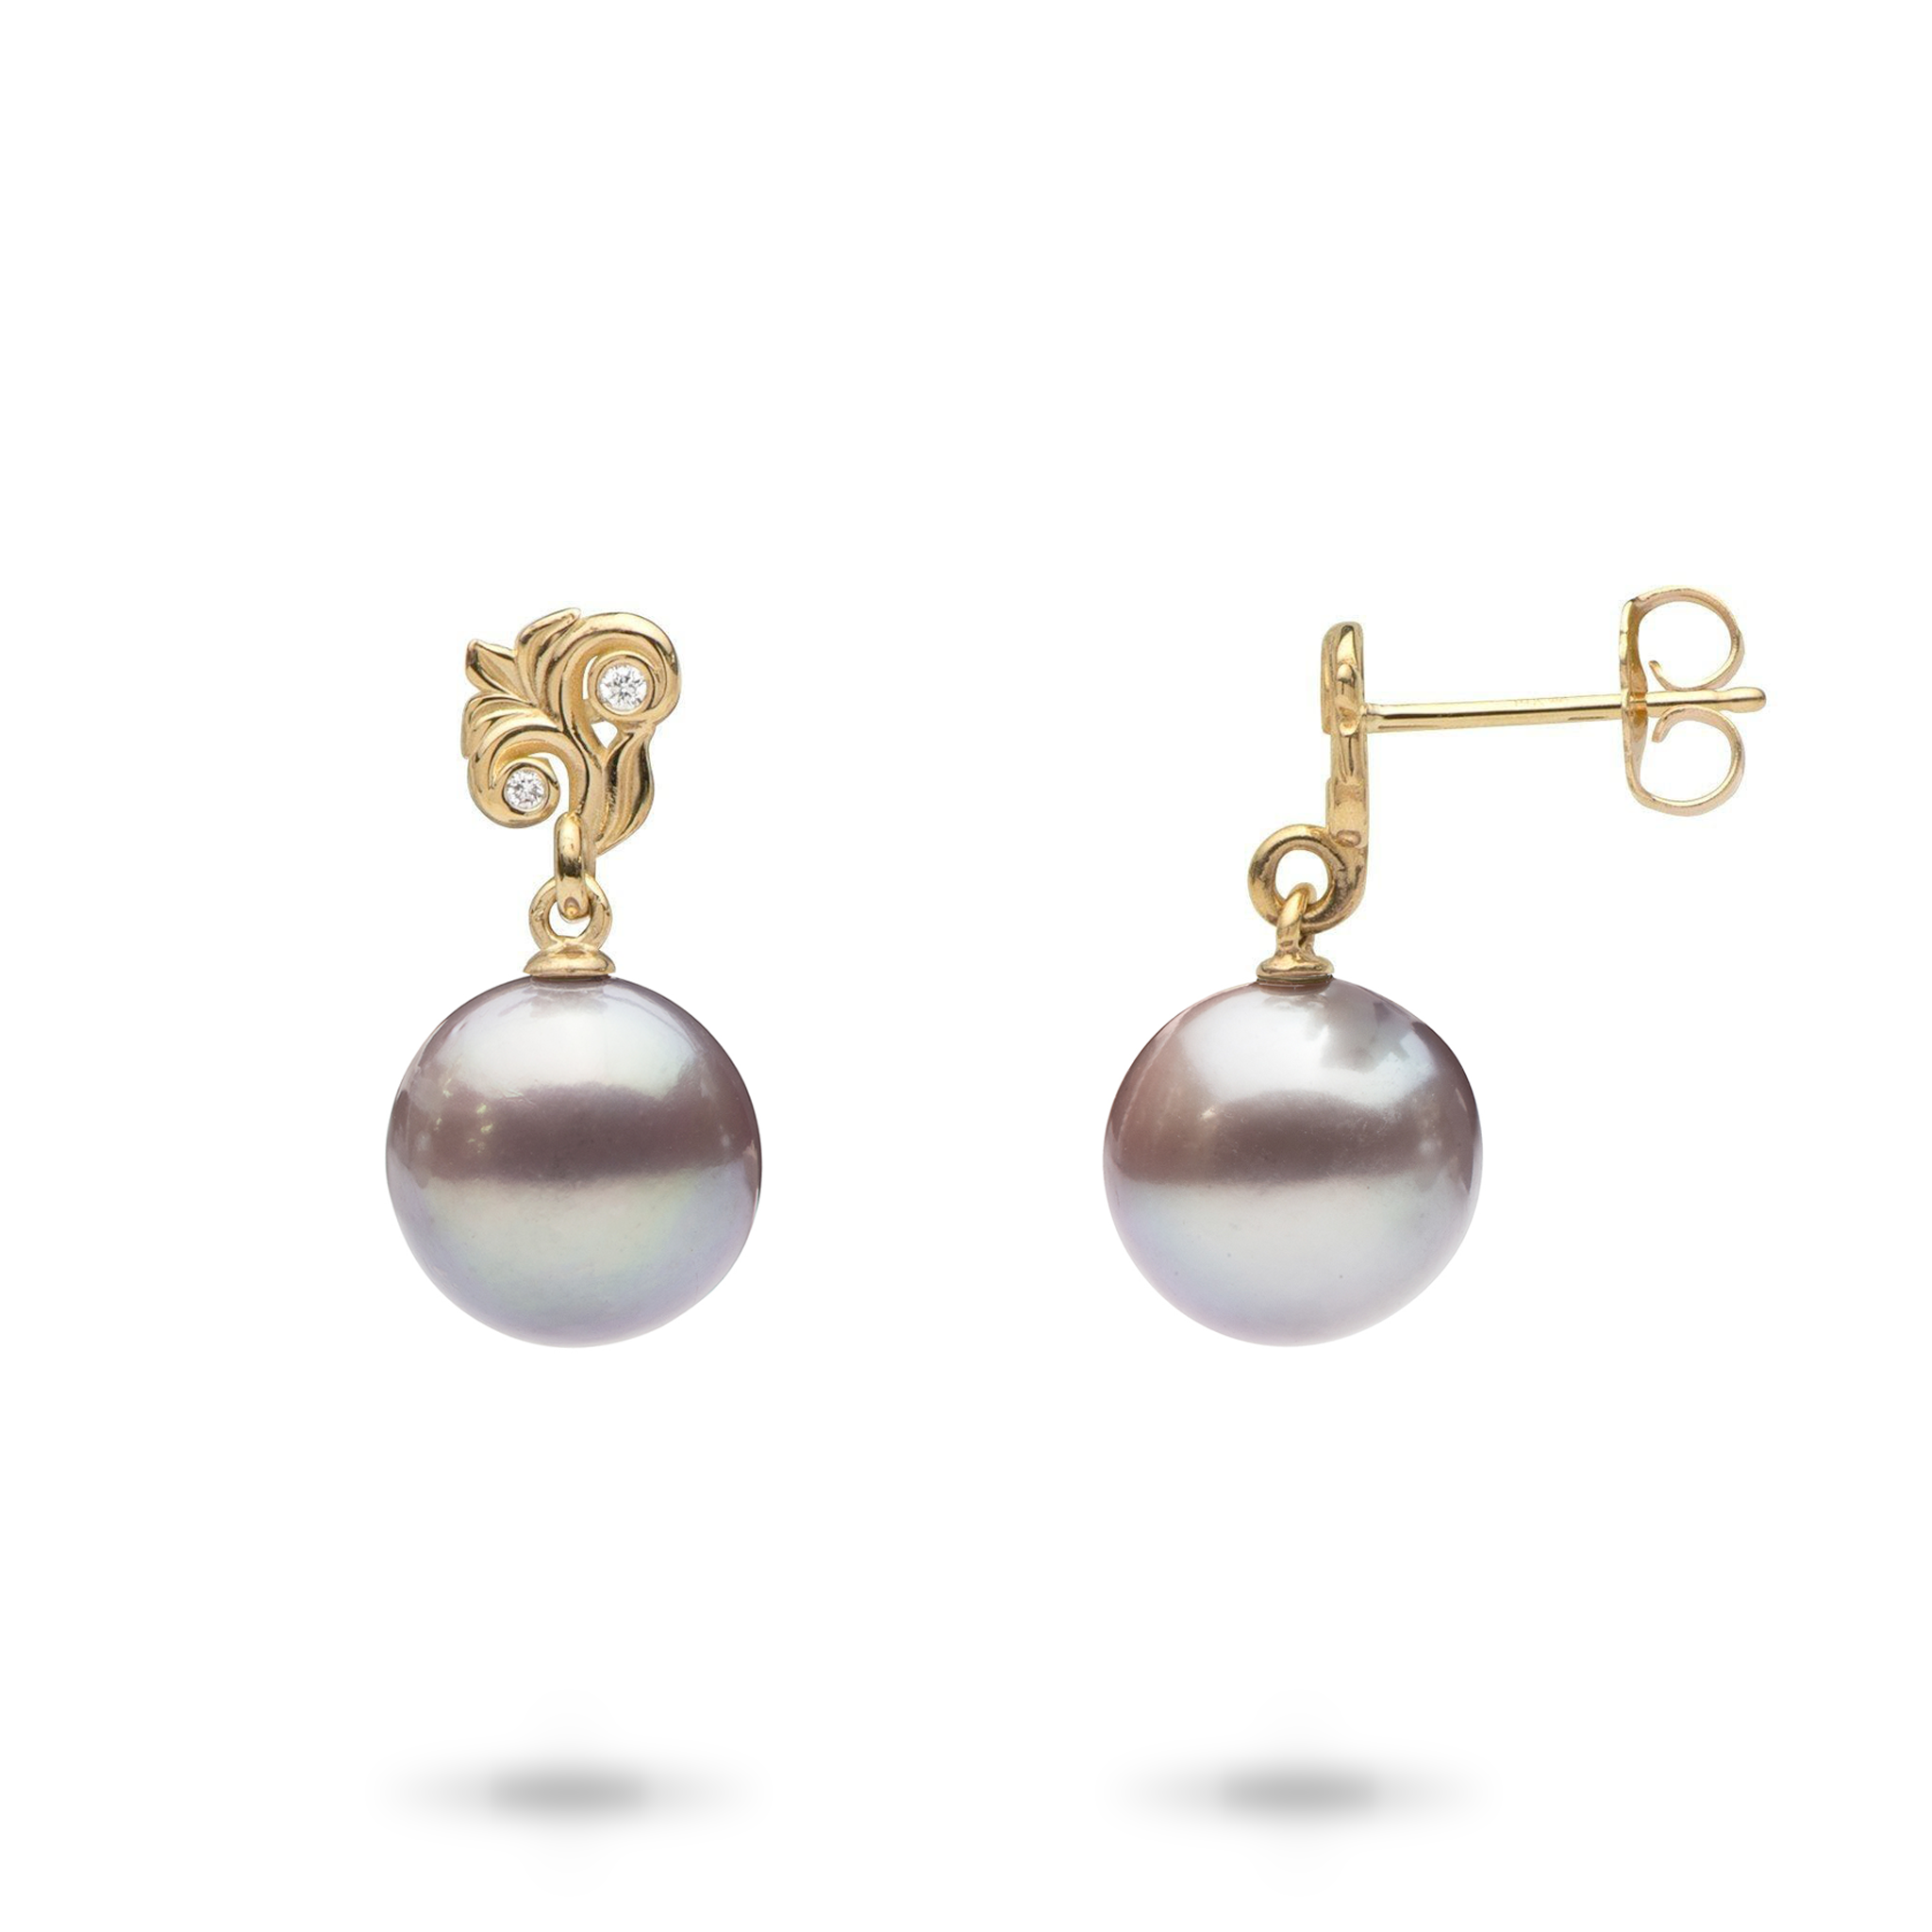 Living Heirloom Freshwater Pearl Earrings in Gold with Diamonds - 10-11mm